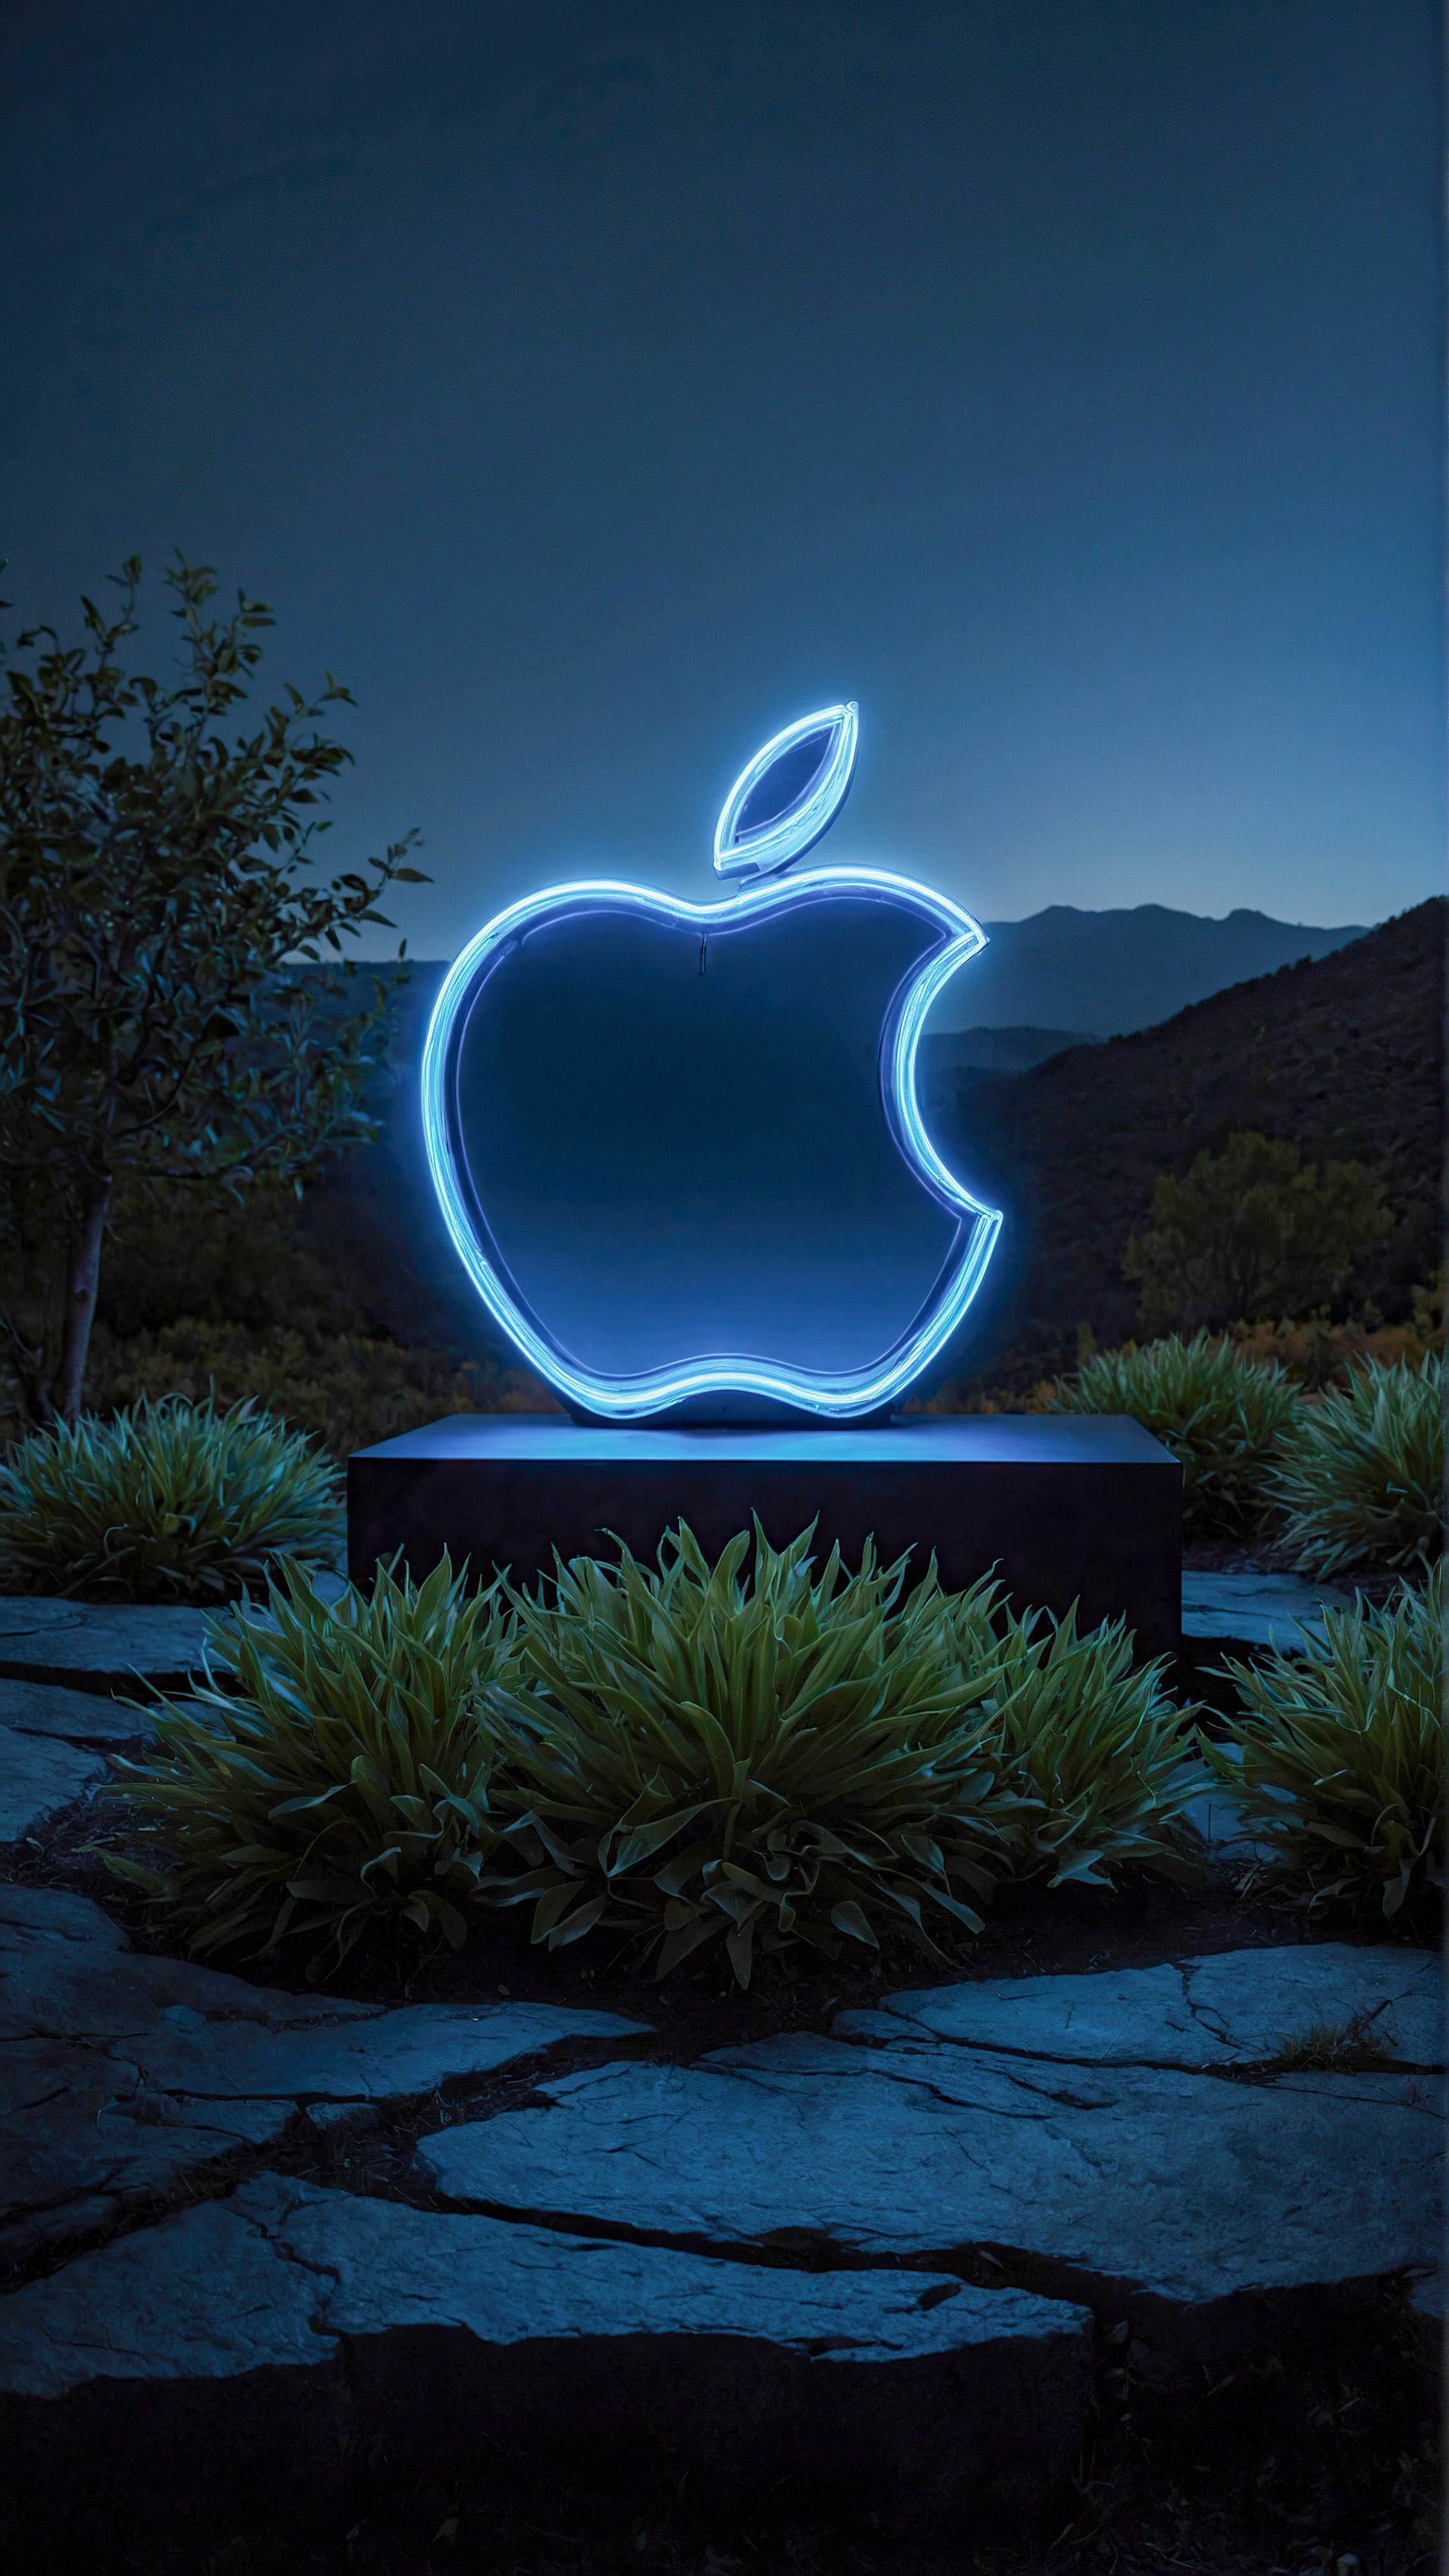 Adorn your iPhone with our HD wallpaper, highlighting the Apple logo illuminated with a neon blue outline, containing a serene landscape within it, set against a dark background.